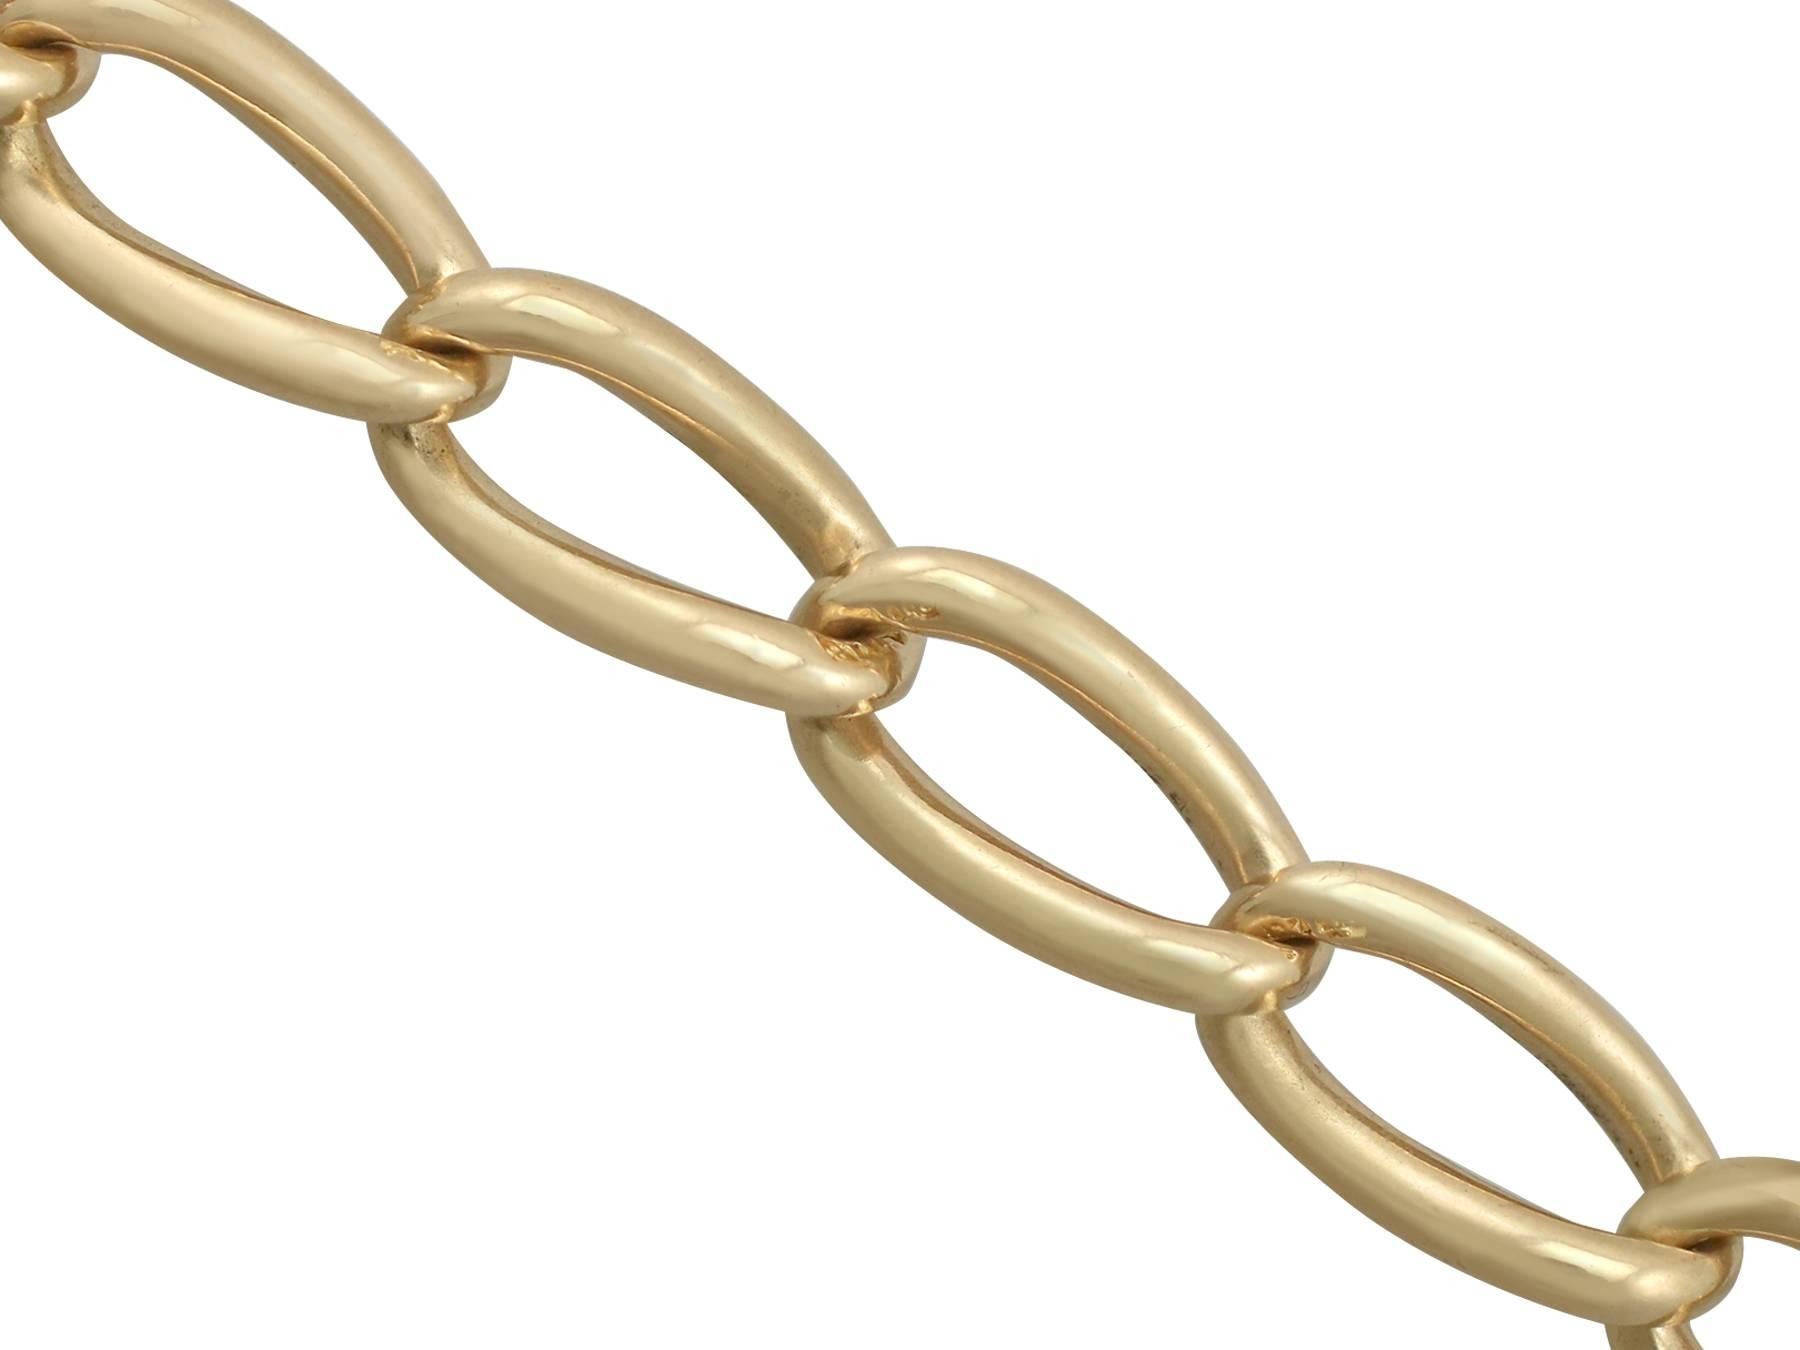 A fine and impressive antique 1900's 18k yellow gold watch chain; part of our diverse antique jewelry and watch chains collections.

This fine and impressive antique curb watch chain has been crafted in 18k yellow gold.

The chain consists of